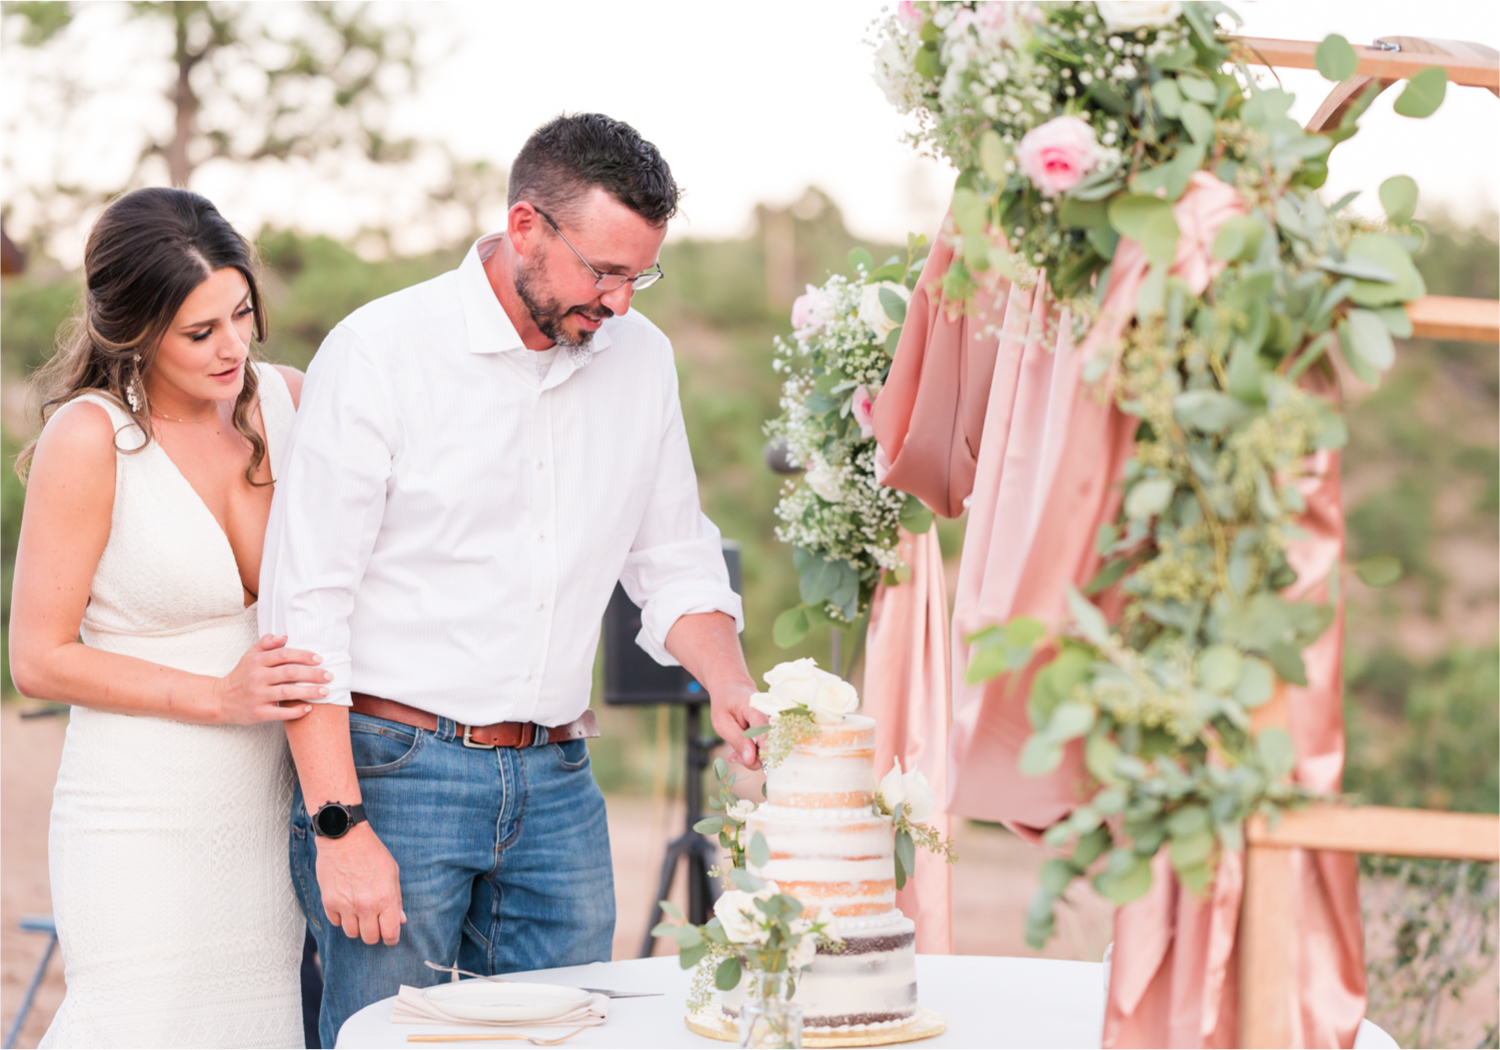 Autumn mountain wedding in Florence Colorado | Britni Girard Photography | Colorado Wedding Photo and Video Team | Mountainside Cabin for intimate wedding with rustic farm-tables and romantic details | 3 tiered cake by Sugar Plum Cake Shoppe White, Dusty Rose and Sage